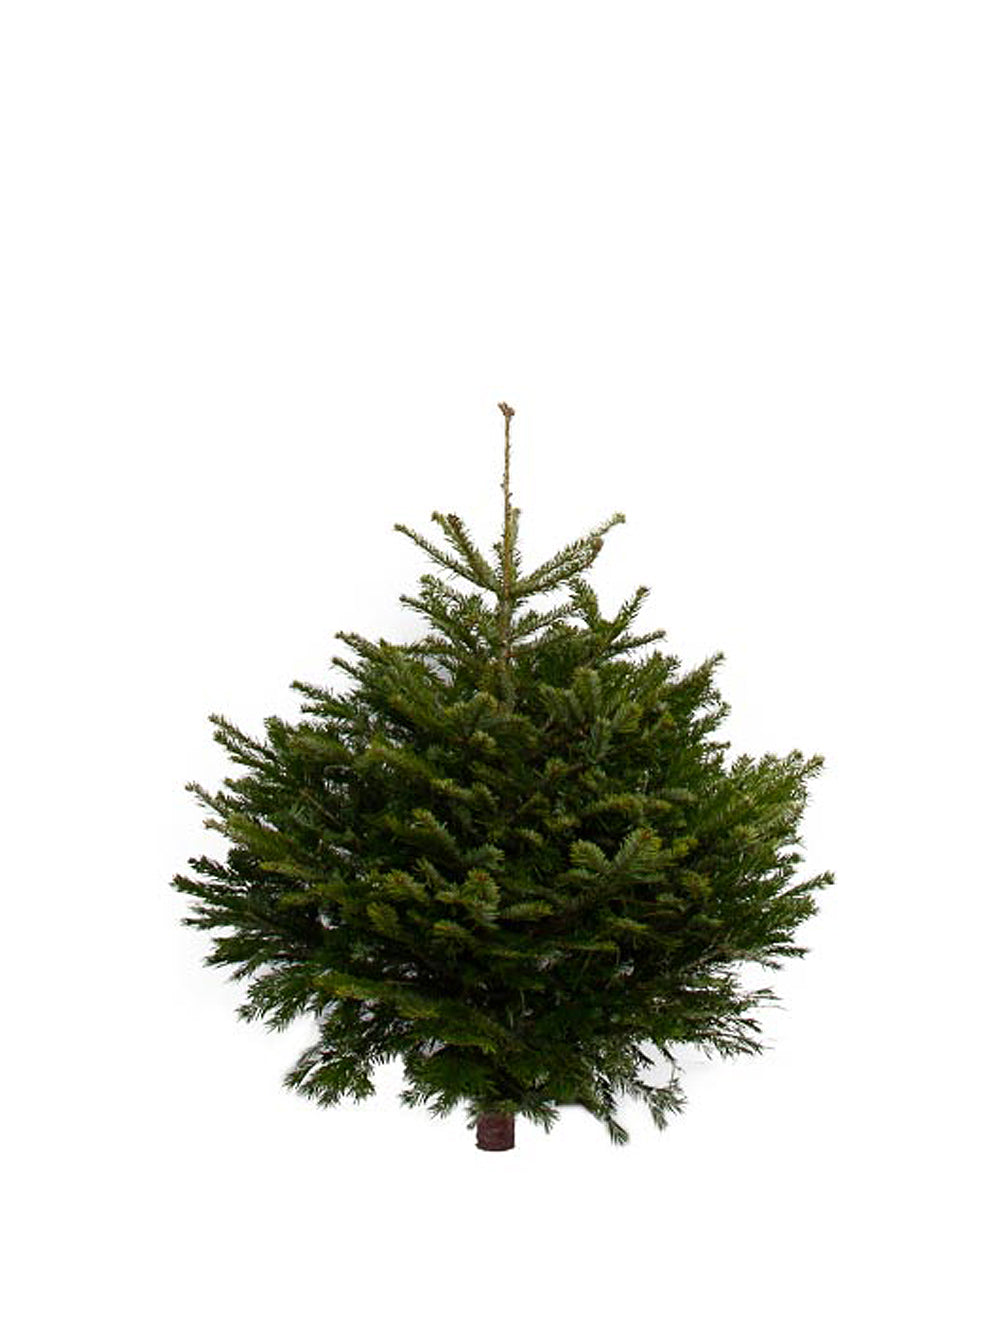 3ft Nordmann Fir Christmas Tree from Pines and Needles